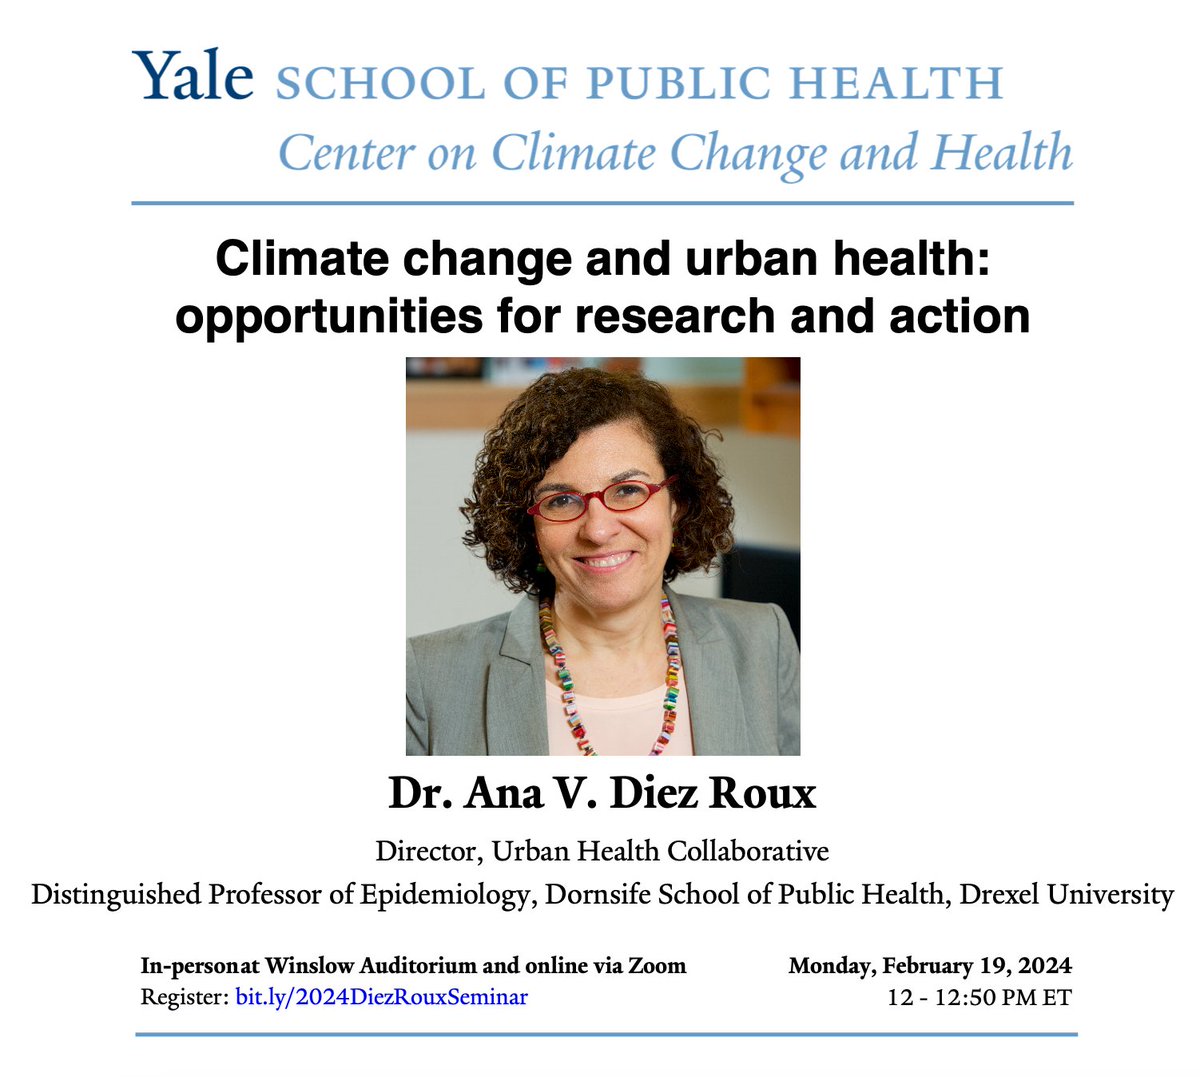 Join our #ClimateChangeandHealth Seminar on Feb. 19th at 12pm ET! 

Our featured speaker, Dr. Ana Diez Roux will deliver the lecture, 'Climate change and urban health: opportunities for research and action.'

Register here👉bit.ly/2024DiezRouxSe…

@adiezroux @drexelpubhealth